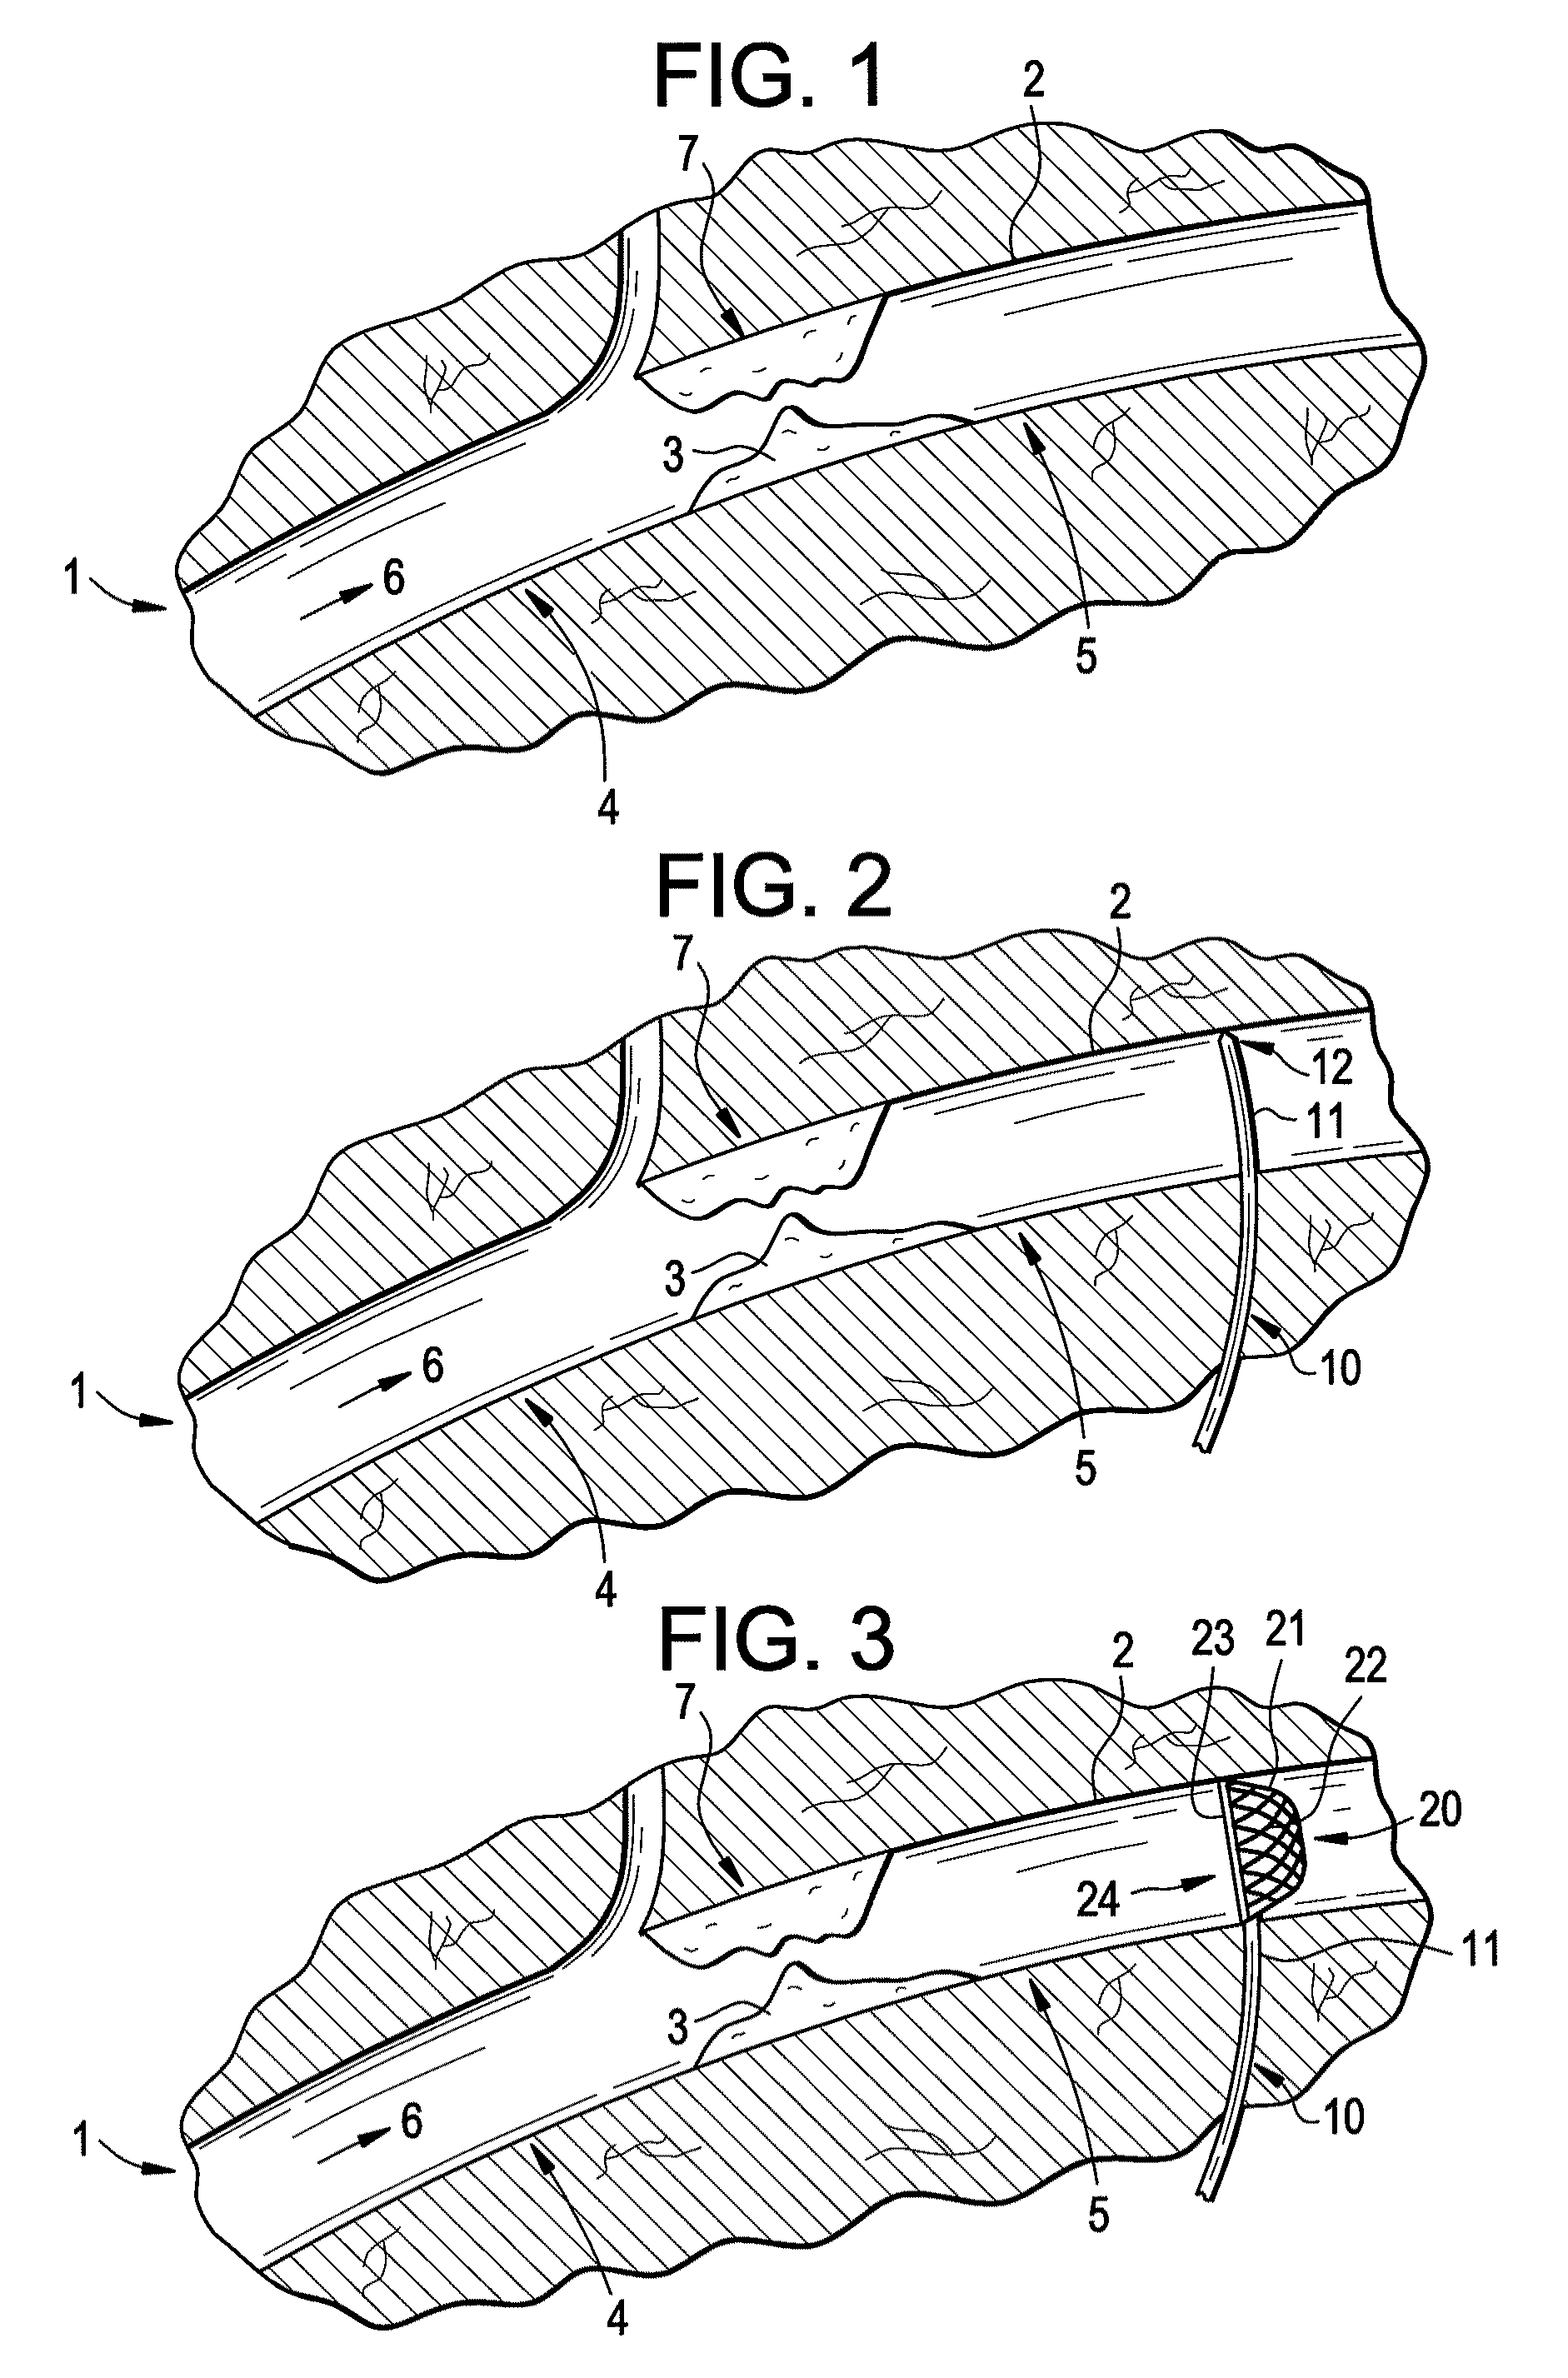 Distal access embolic protection system and methods of using the same